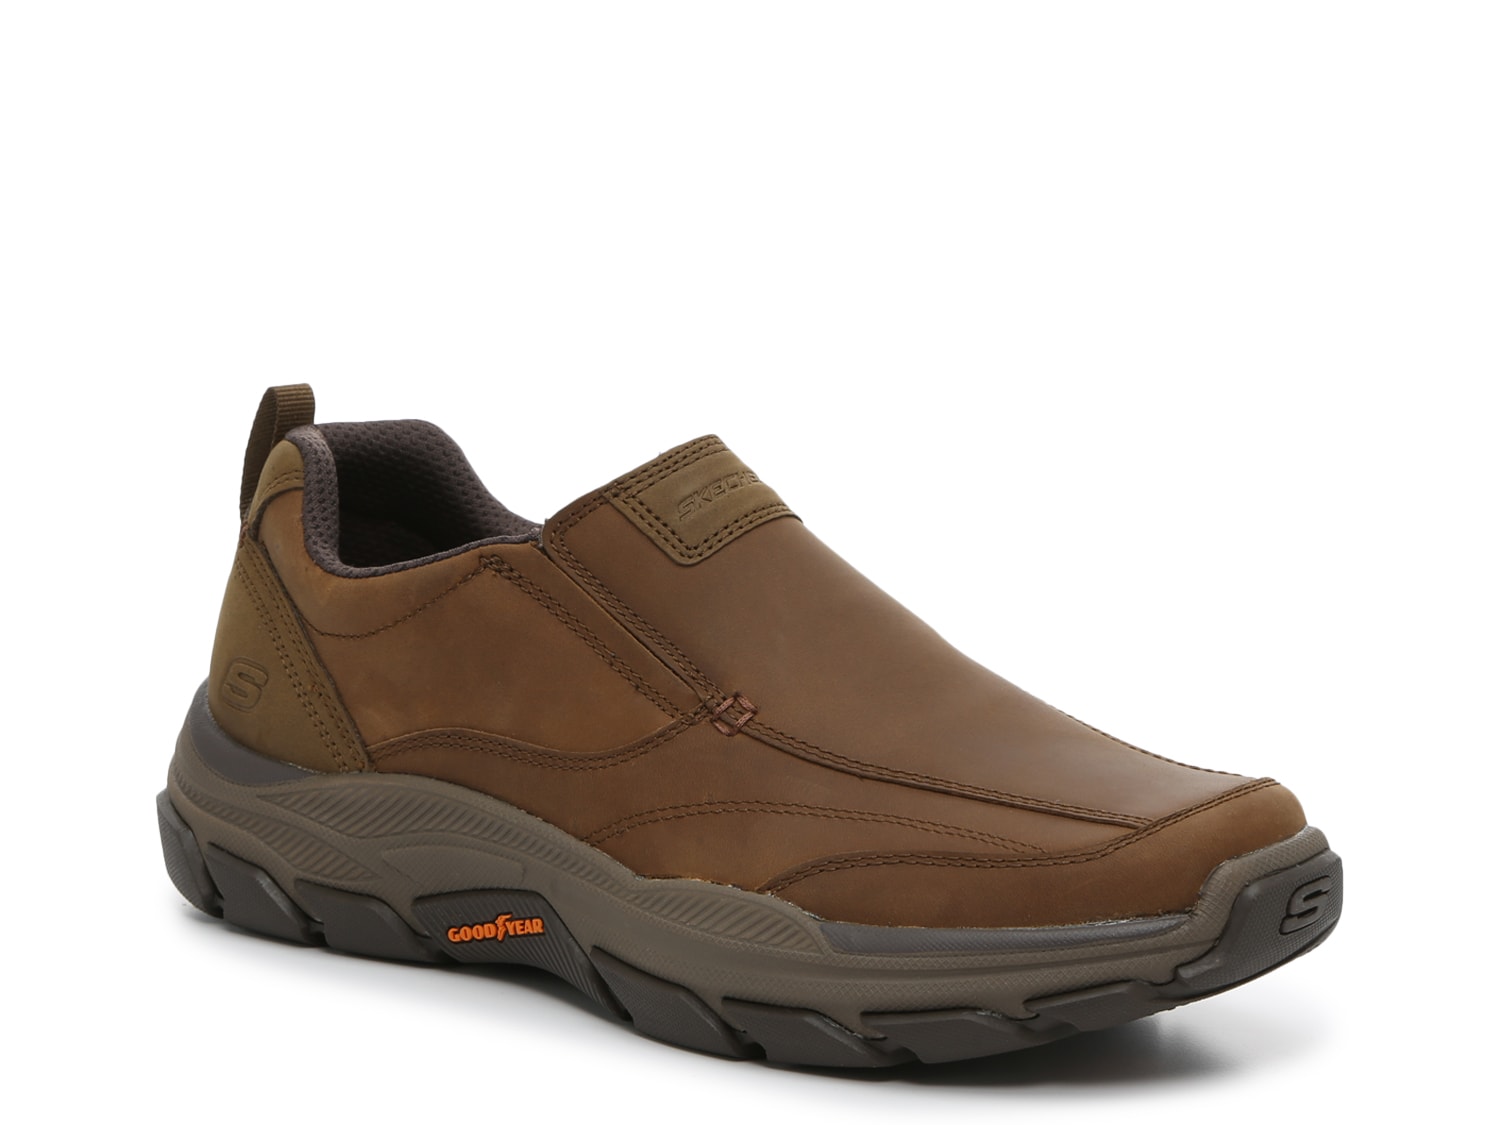 Skechers Relaxed Fit Lowry Slip-On - Free Shipping | DSW